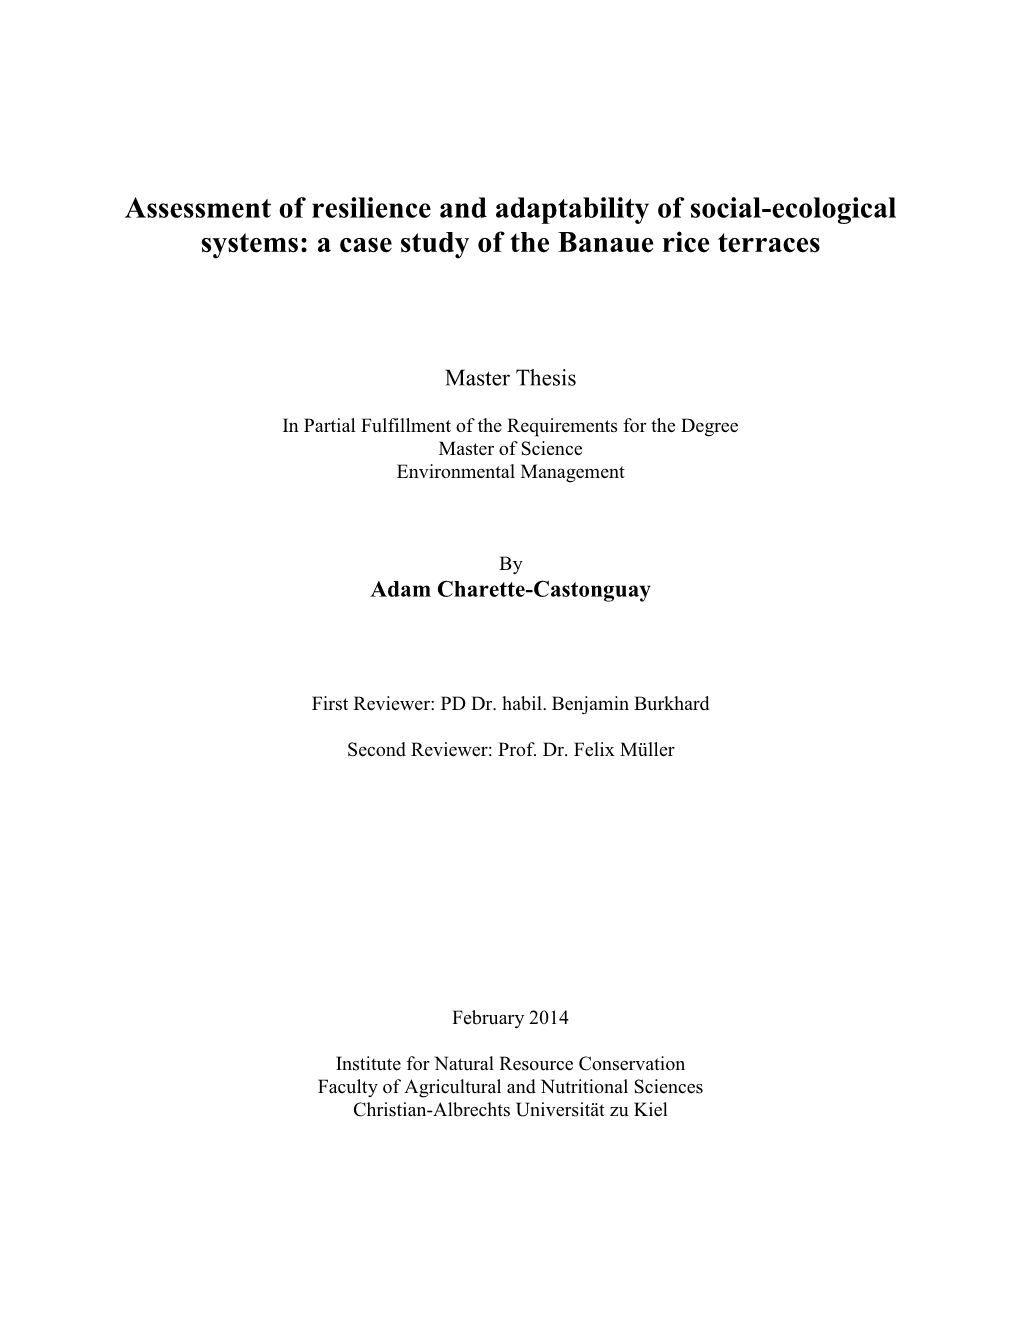 Assessment of Resilience and Adaptability of Social-Ecological Systems: a Case Study of the Banaue Rice Terraces